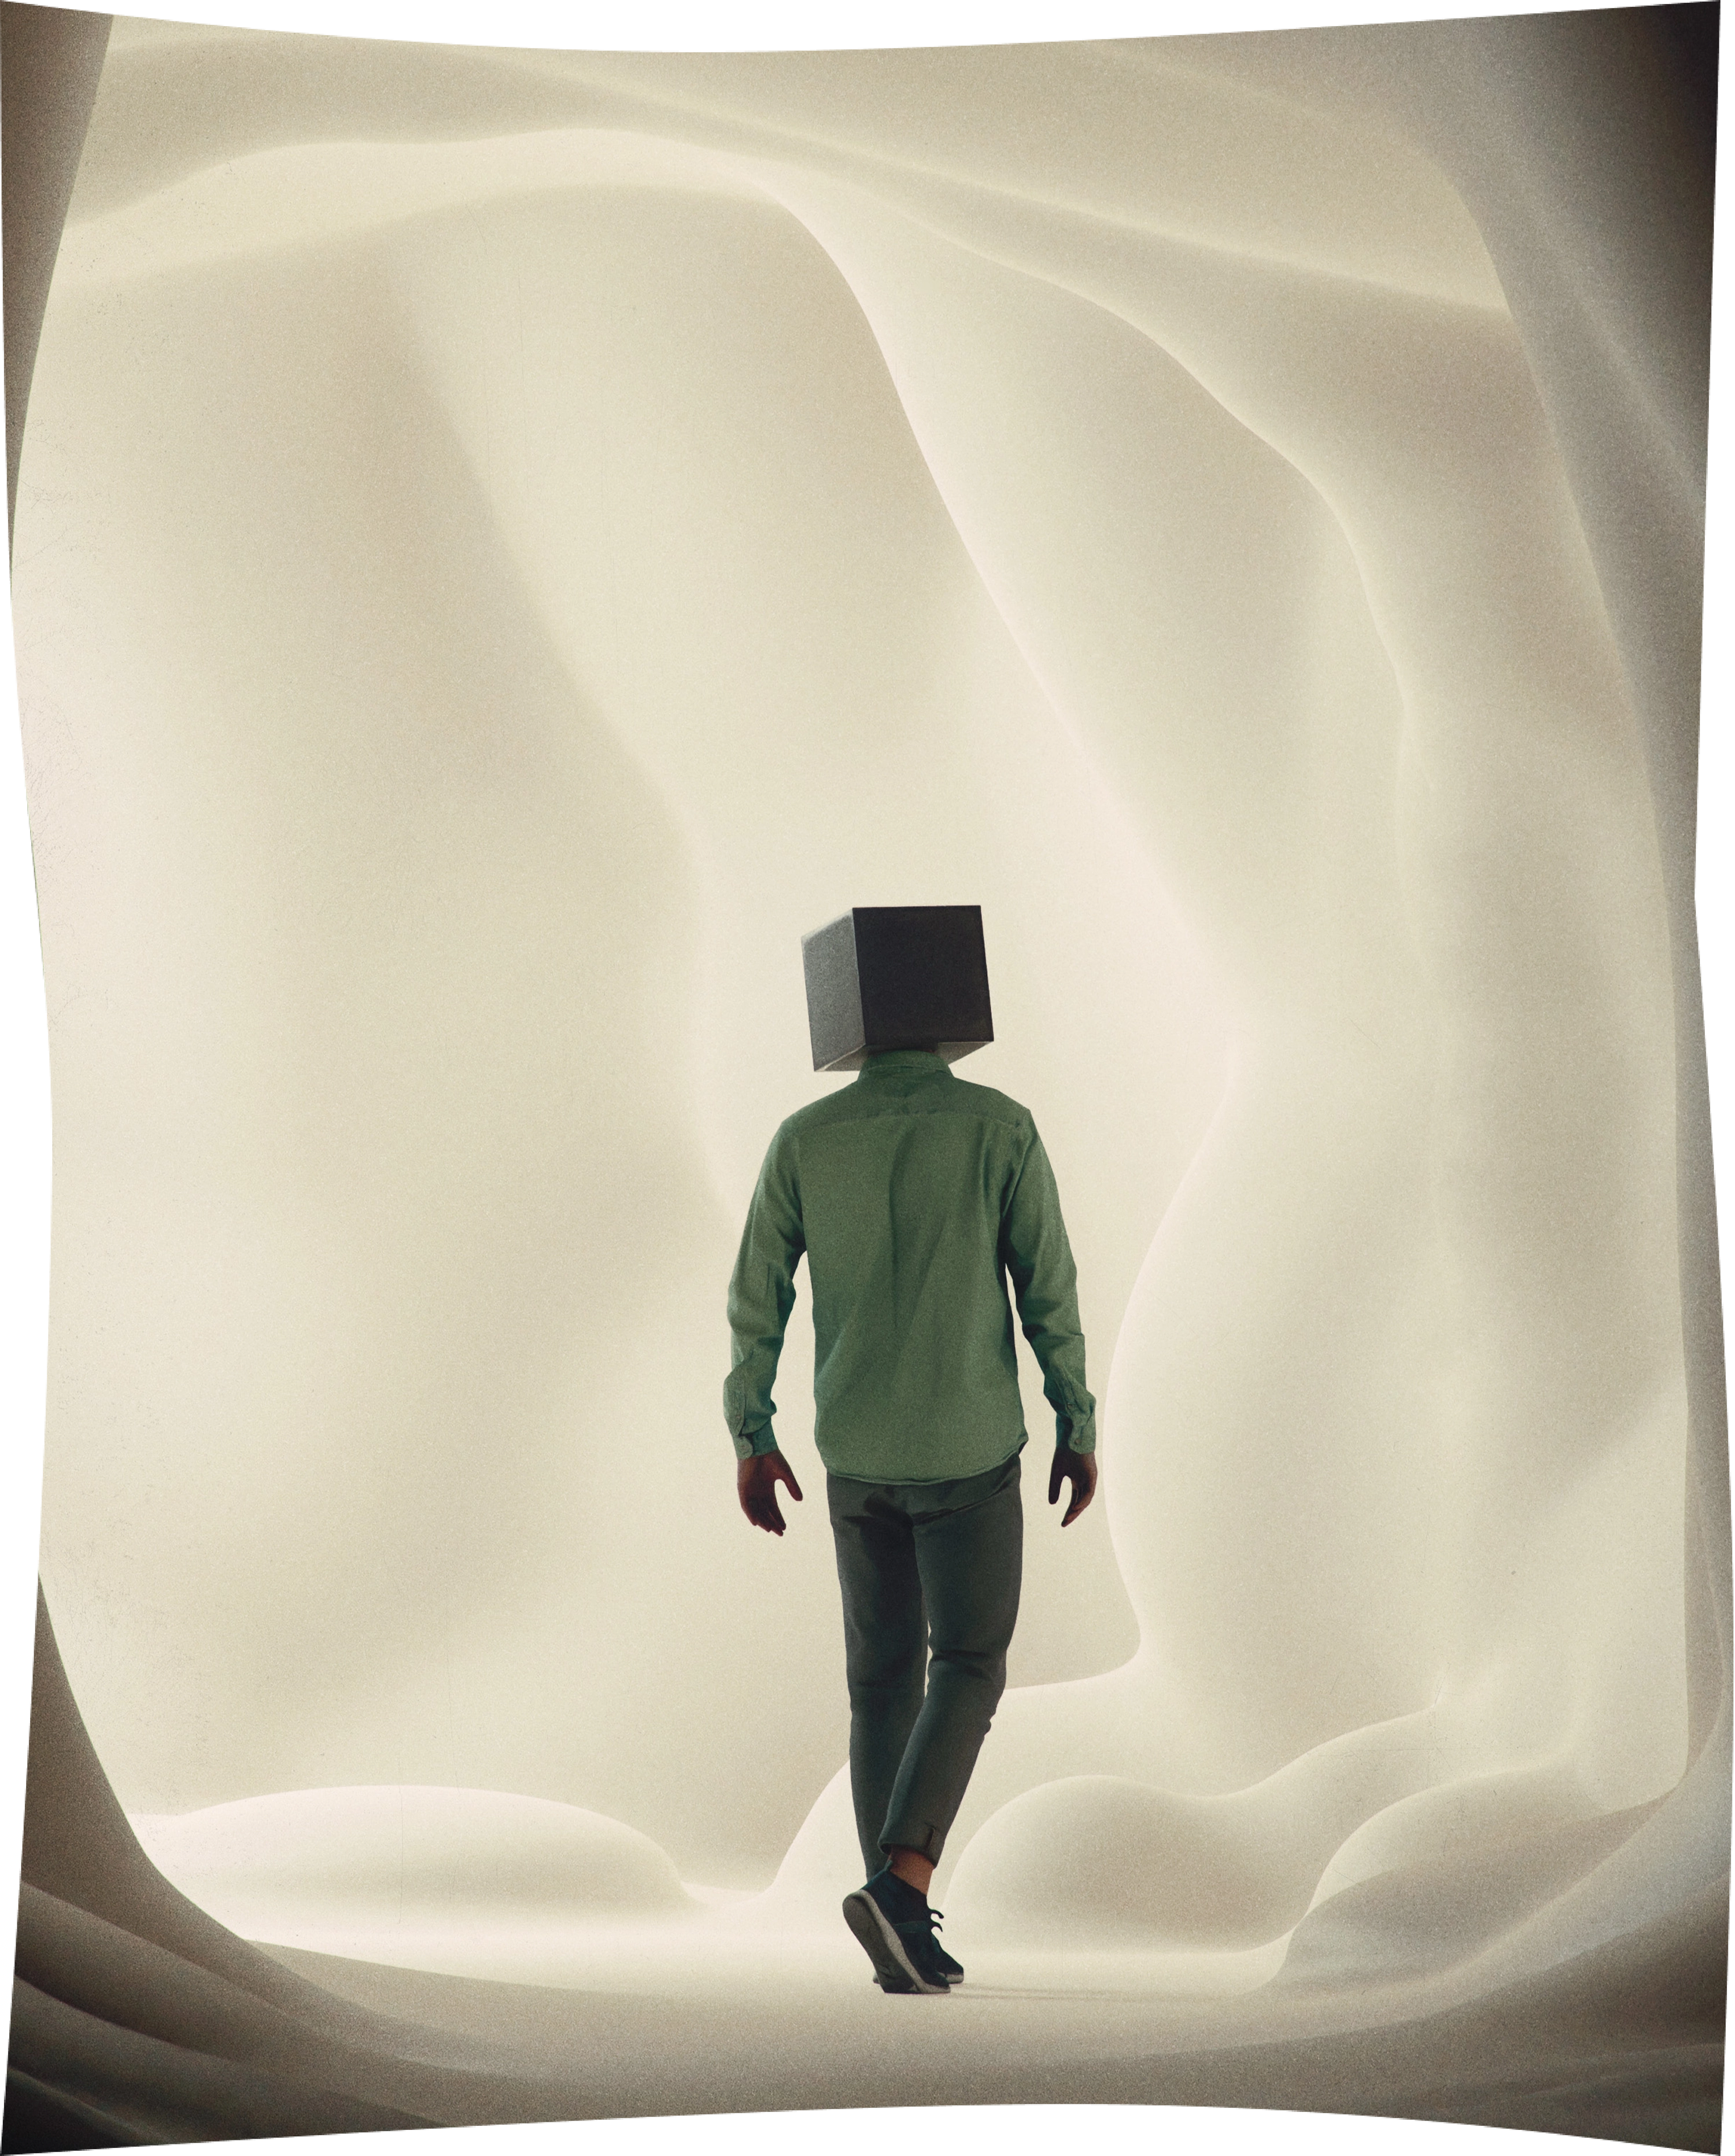 A man with a box covring his face standing in a white quite place